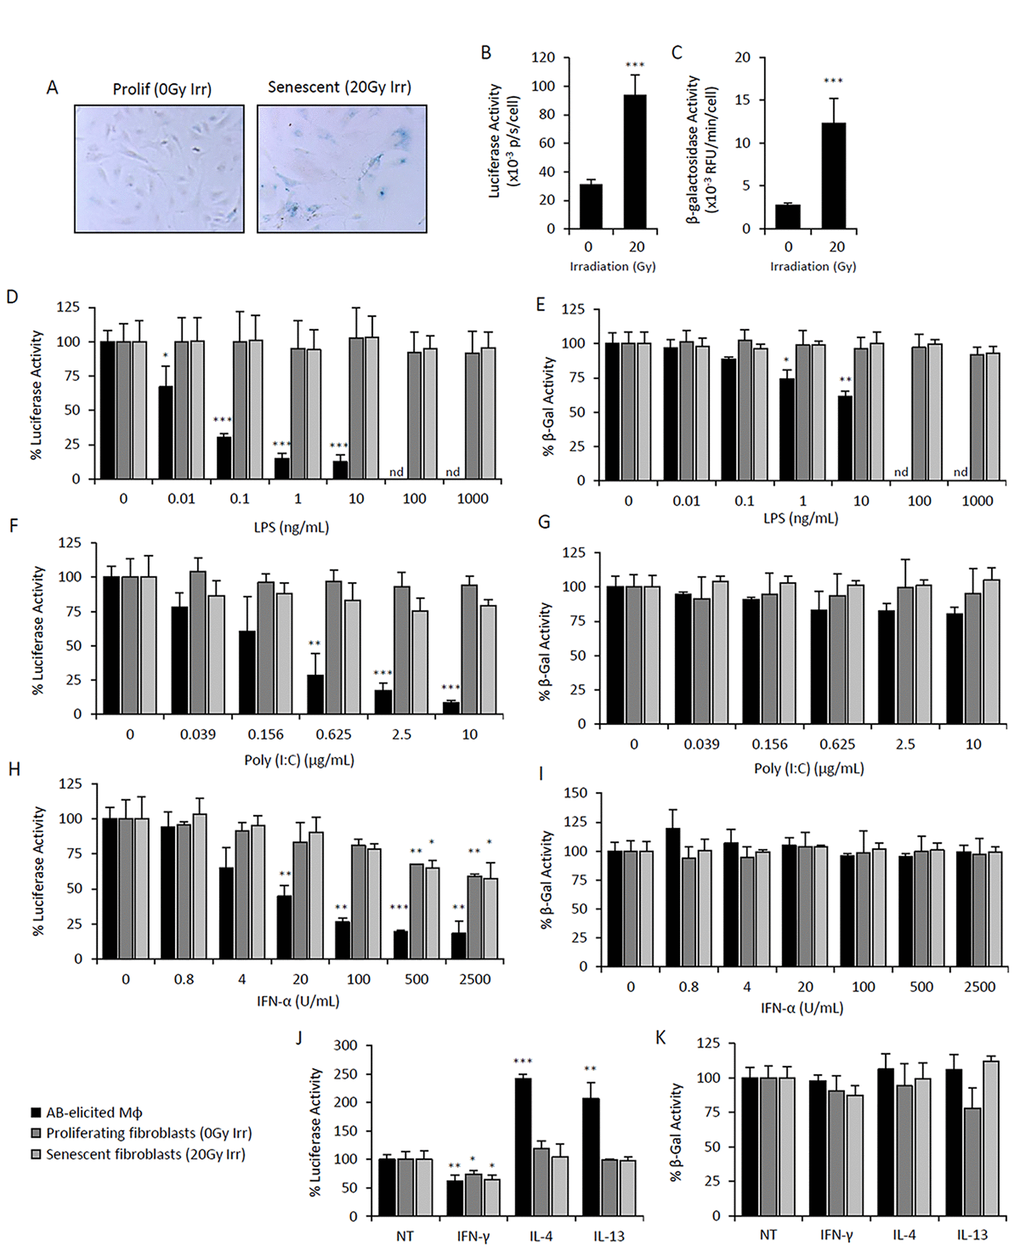 Elevated p16Ink4a and β-galactosidase is regulated by immunomodulatory agents in macrophages but not mesenchymal SCs. Primary cultures of adipose-derived mesenchymal stromal cells (AdMSC) isolated from p16Ink4a/Luc mice were irradiated (20Gy) and cultured for 10 days for senescence induction. Mock irradiated cells were passaged and used as a proliferating cell control. Response of senescent and proliferating AdMSCs to immunomodulatory agents were compared to that of peritoneal lavage cells elicited by the alginate bead model. (A-C) Characterization of senescent and proliferating AdMSCs. Microphotographs of SAβG-stained cells depicts positive staining of senescent cells, as well as an enlarged and flattened morphology, compared to that of proliferating cell control (A). p16Ink4a promoter-driven luciferase activity (B) and β-galactosidase activity measured via 4-MUG hydrolysis (C) were measured in senescent and proliferating AdMSCs, confirming senescent phenotypes. (D-K) Dose-response curves of LPS (D&E), Poly(I:C) (F&G), IFN-α (H&I), and IFNγ (10 ng/mL), IL-4 (20 ng/mL) and IL-13 (10 ng/mL) (J&K) on p16Ink4a promoter-driven luciferase activity (left panels: D,F,H& J) and β-galactosidase activity measured via 4-MUG hydrolysis (right panels: E,G,I&K) after 72hr treatment. No effect on viability was observed via CyQuant Direct assay (>80% viability). Results are shown as the mean ± standard deviation for at least 3 experiments, with statistical comparison to non-treated controls; *, p-value 